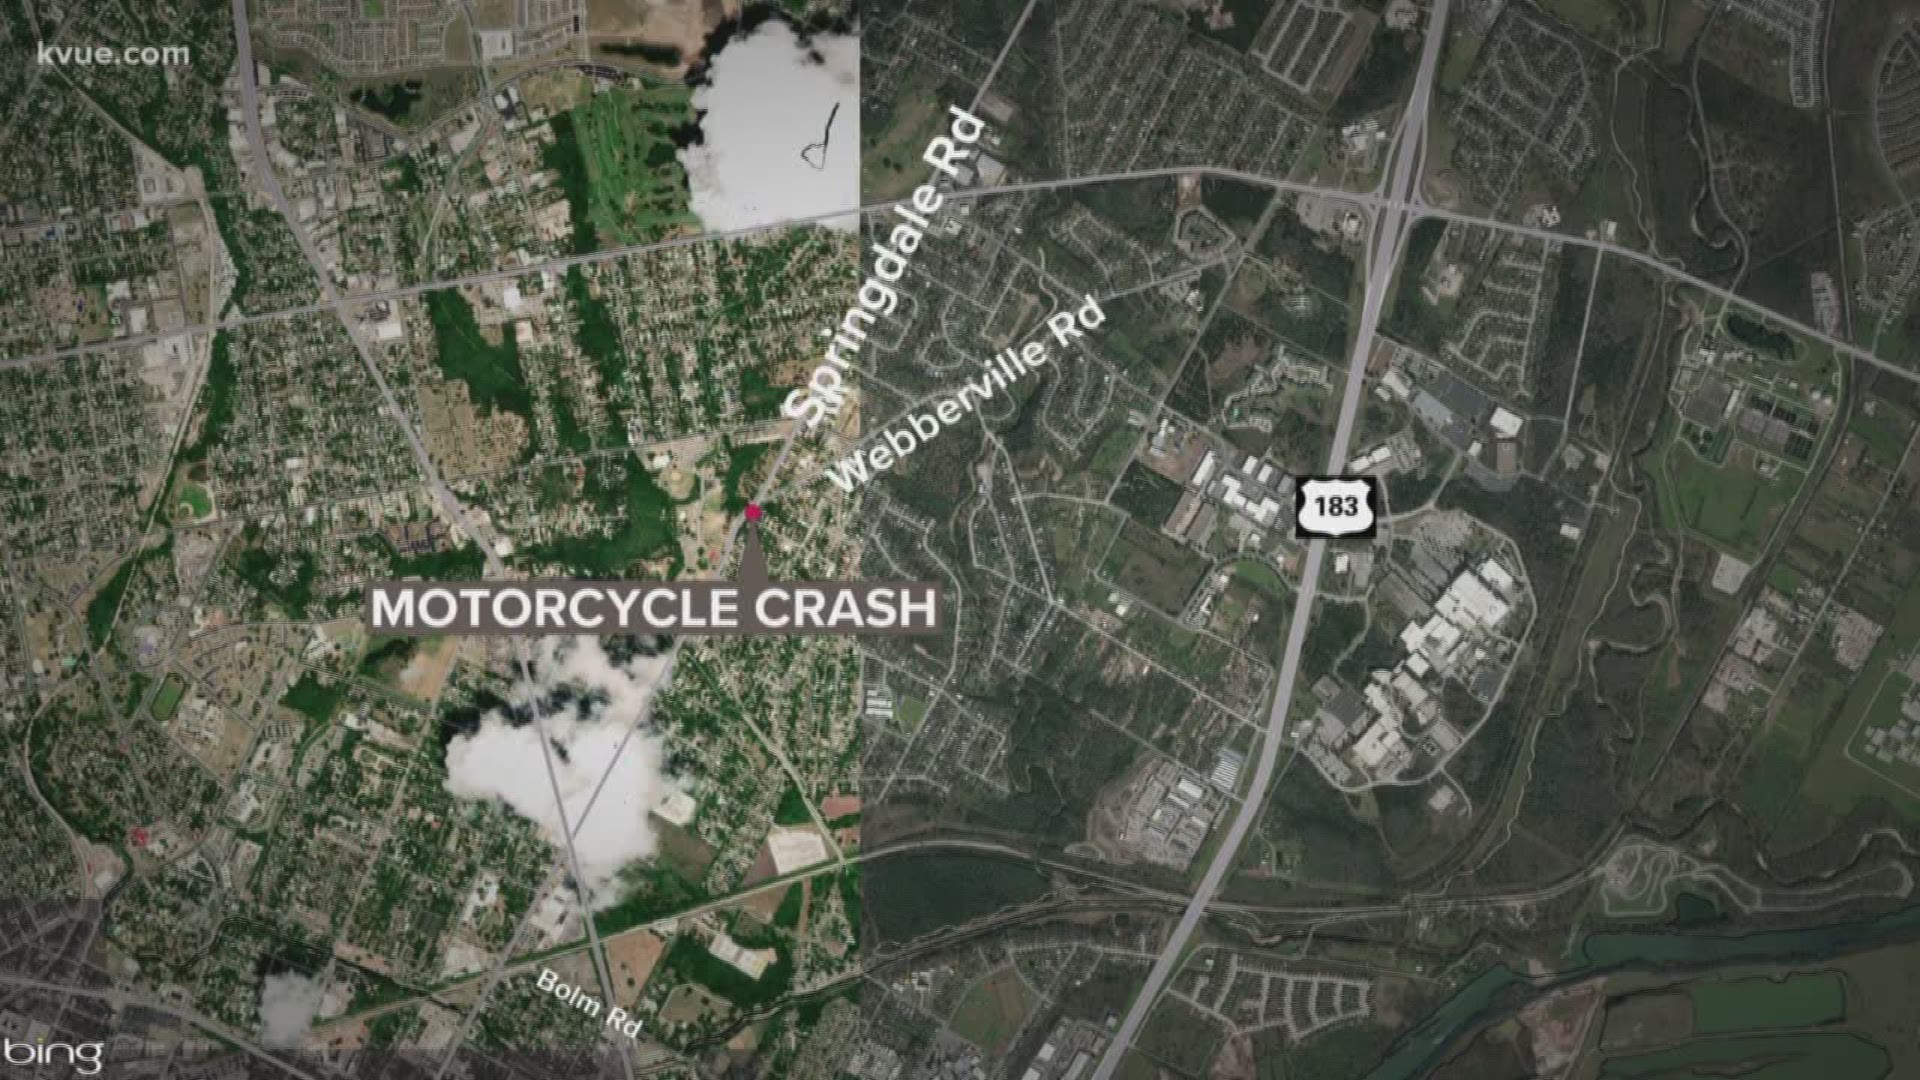 A motorcycle rider lost control and crashed into a car, killing the rider.